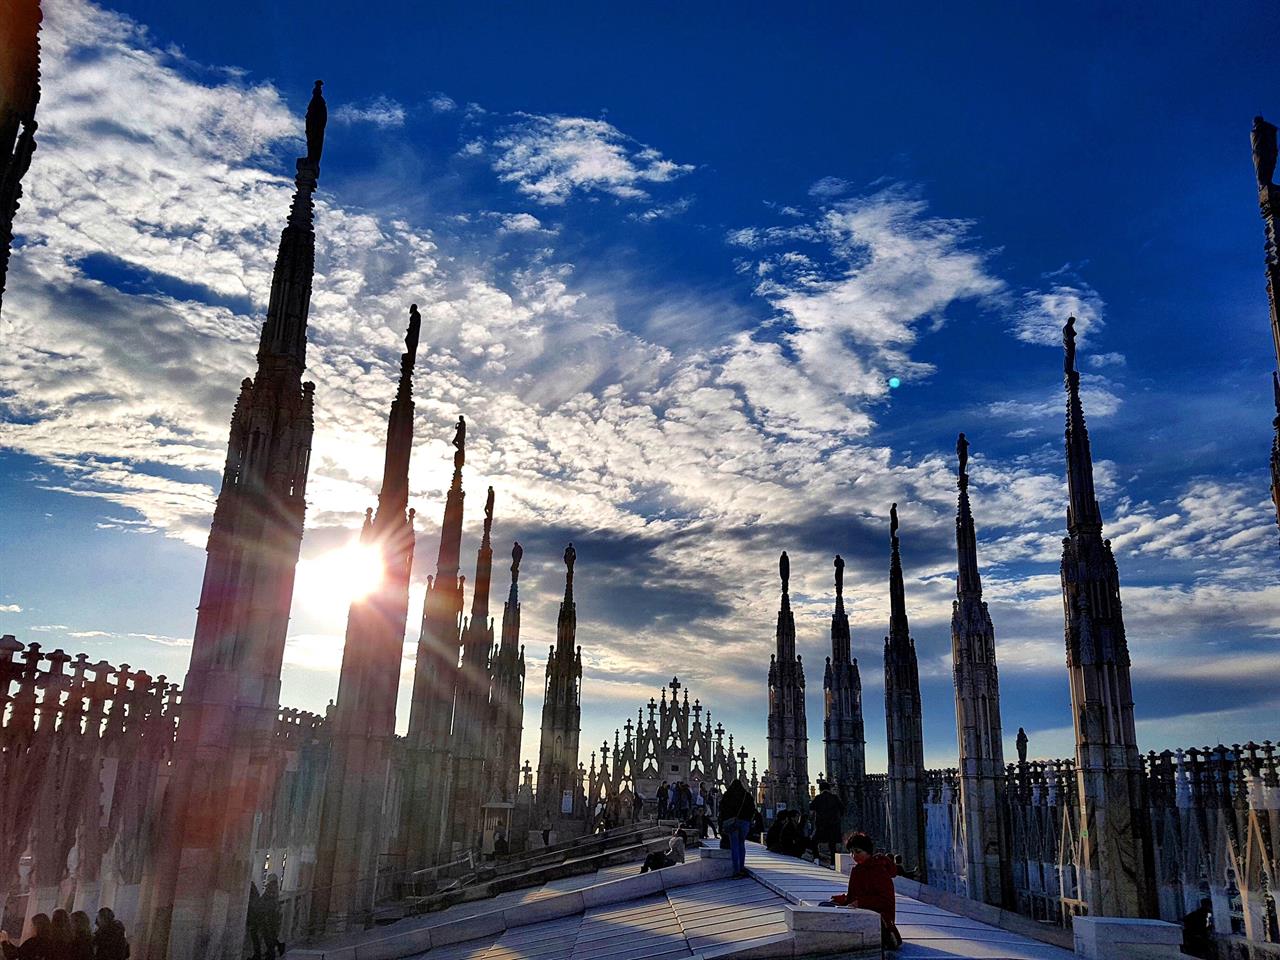 The Duomo’s Terraces will be open from June to September until 8.30 pm